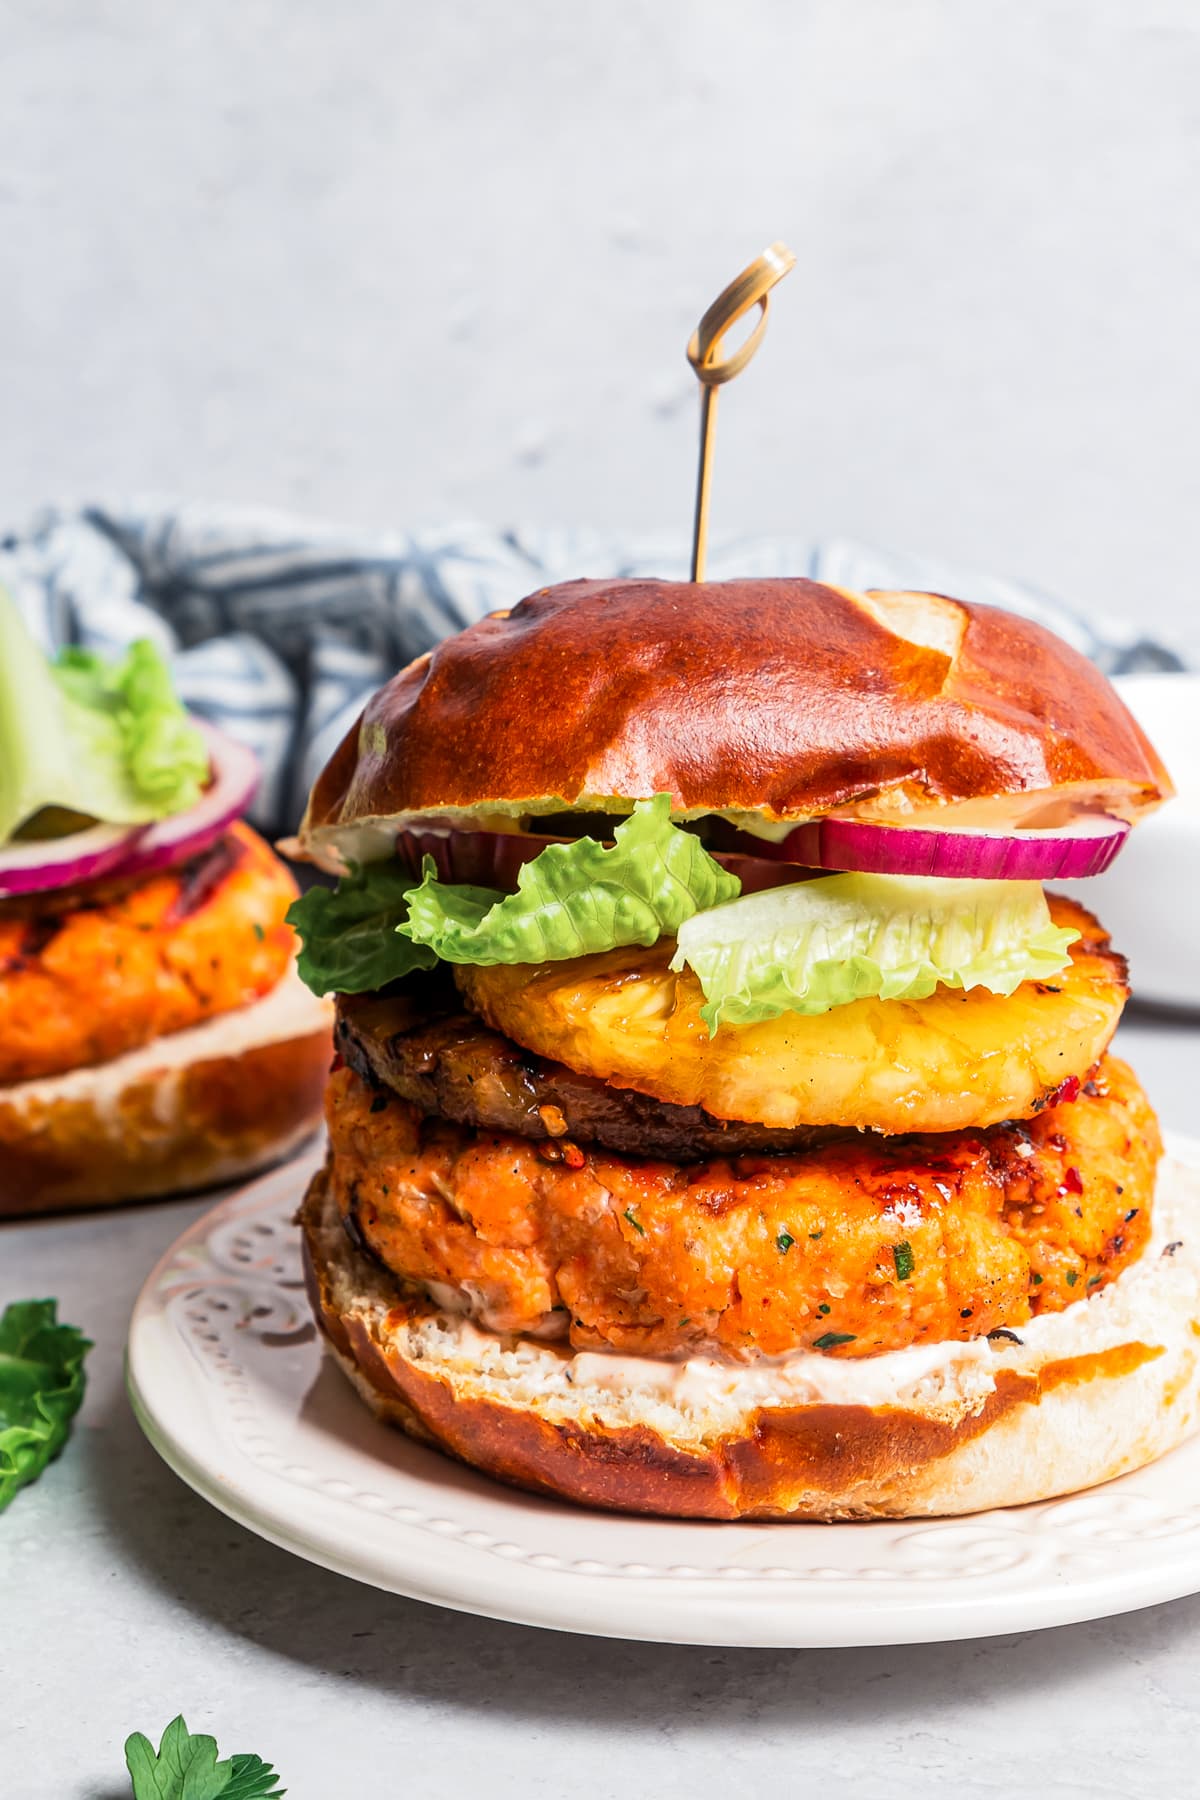 A grilled salmon burger on a plate with another burger behind it being topped with red onion and lettuce.